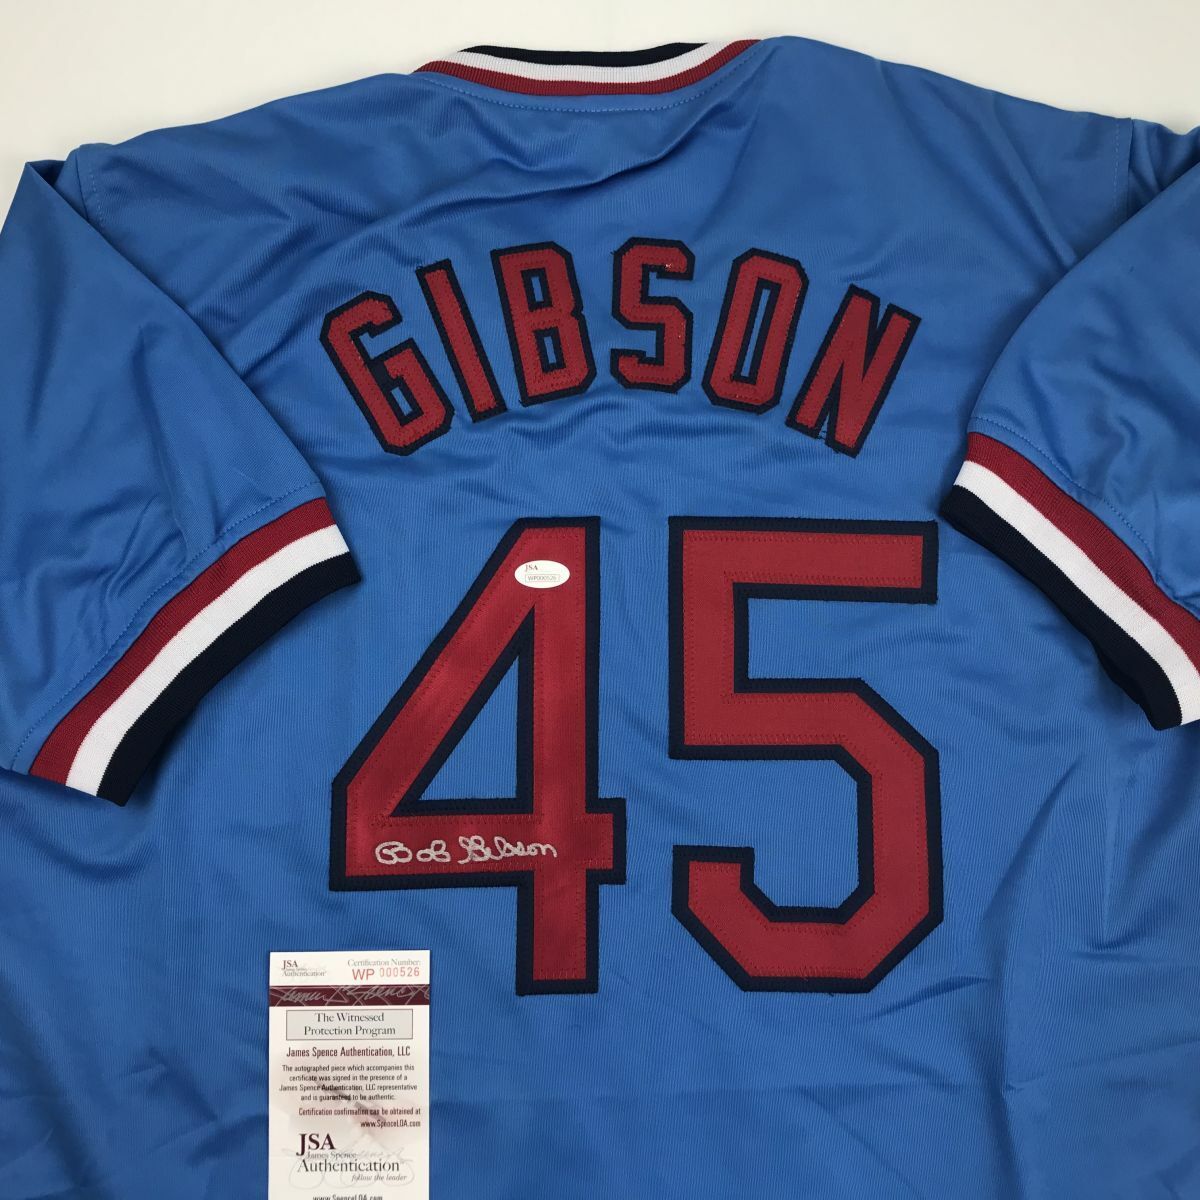 bob gibson authentic jersey